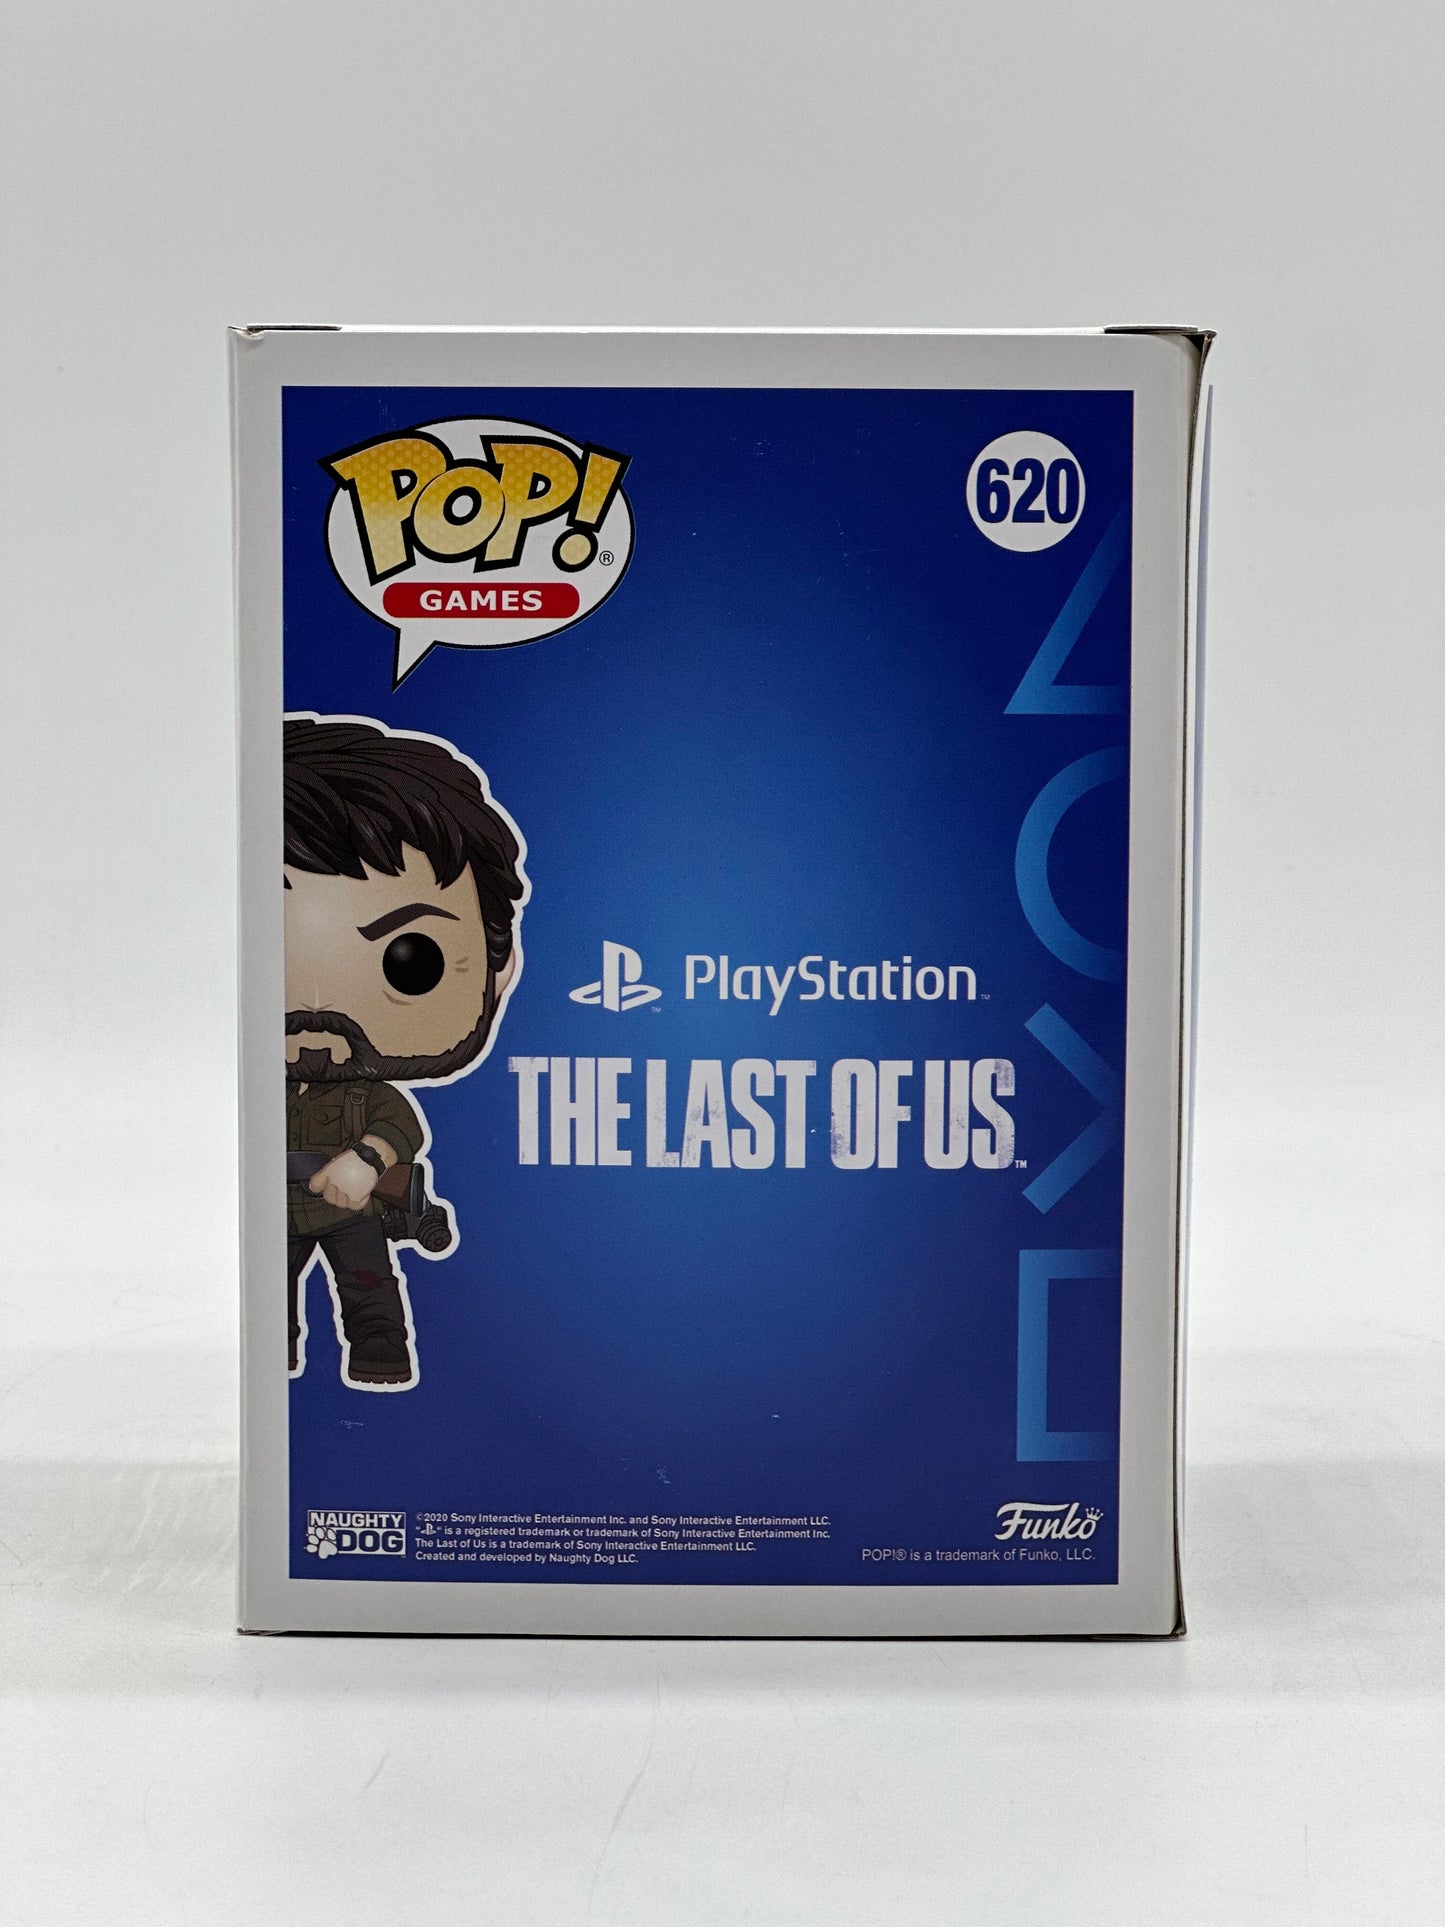 Pop! PlayStation 620 Joel Only GameStop Official Licensed Product